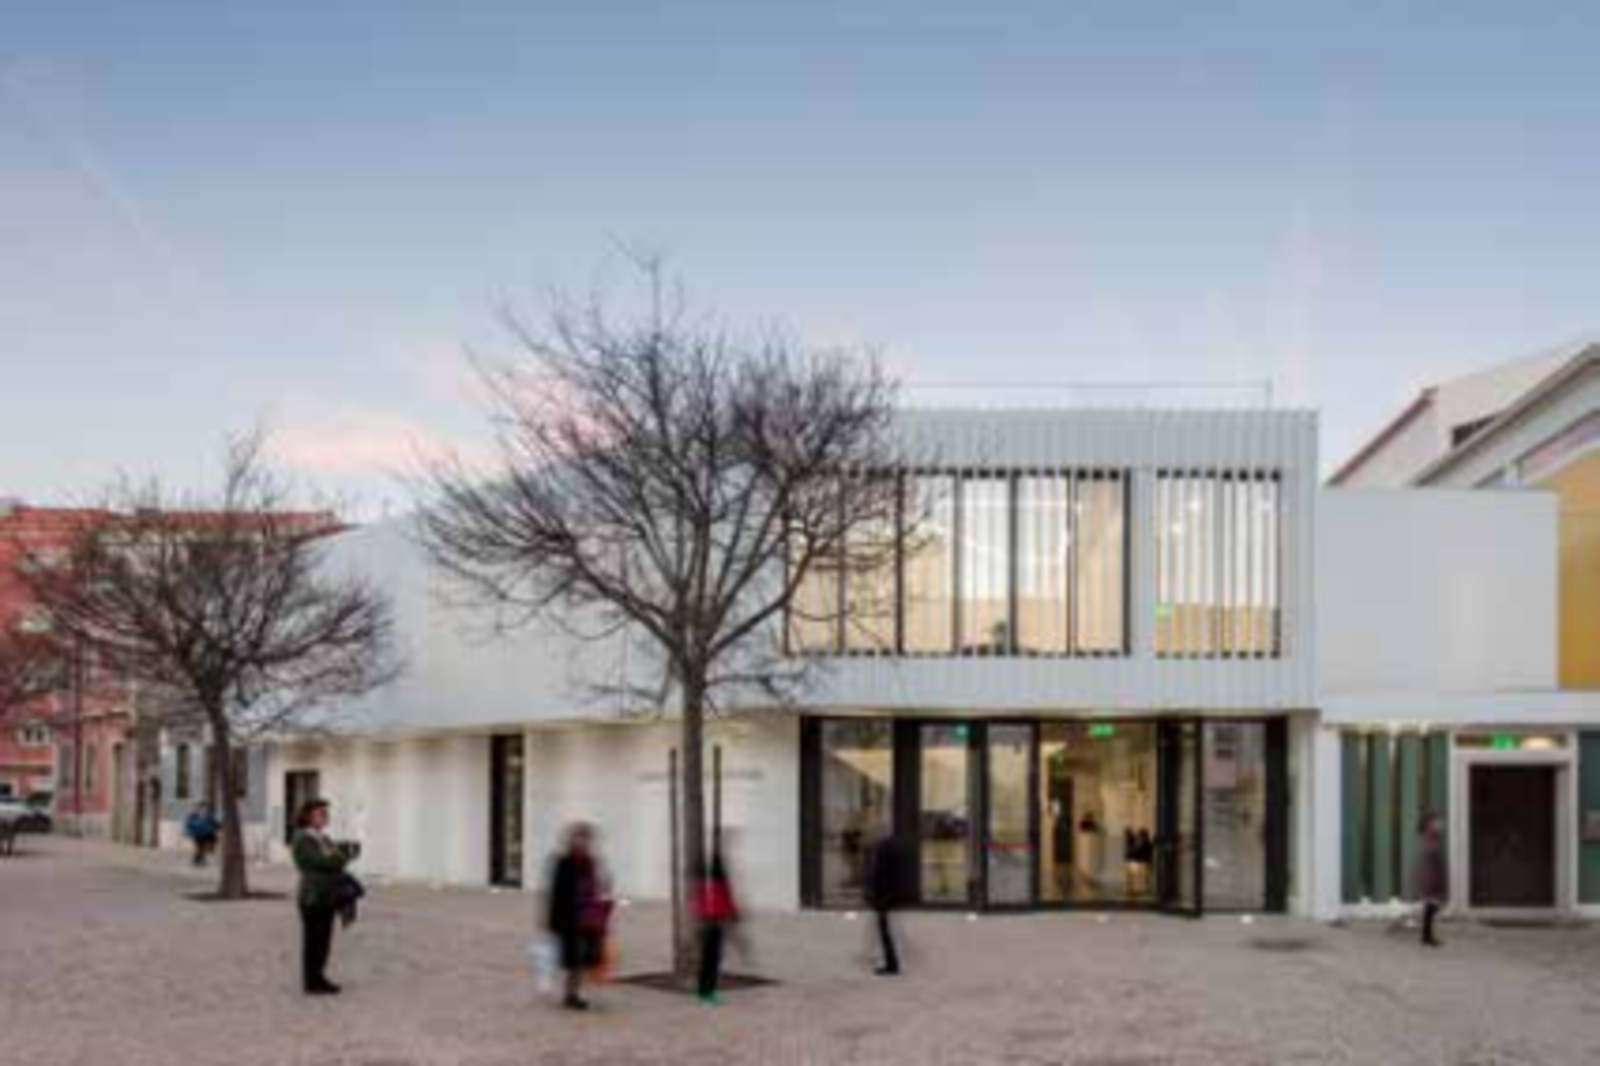 Portuguese architecture was honored by the american architecture prize